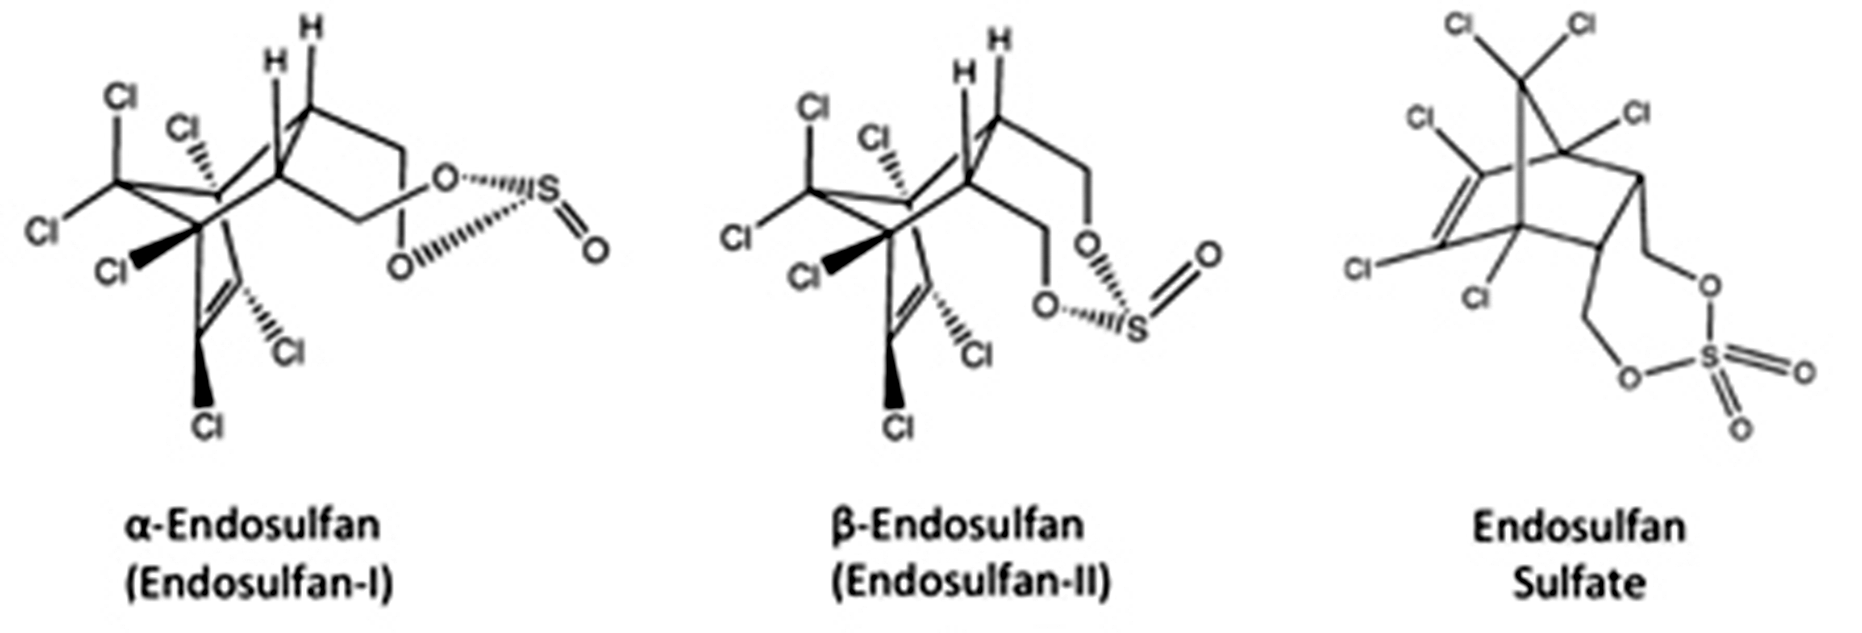 endosulfan structures